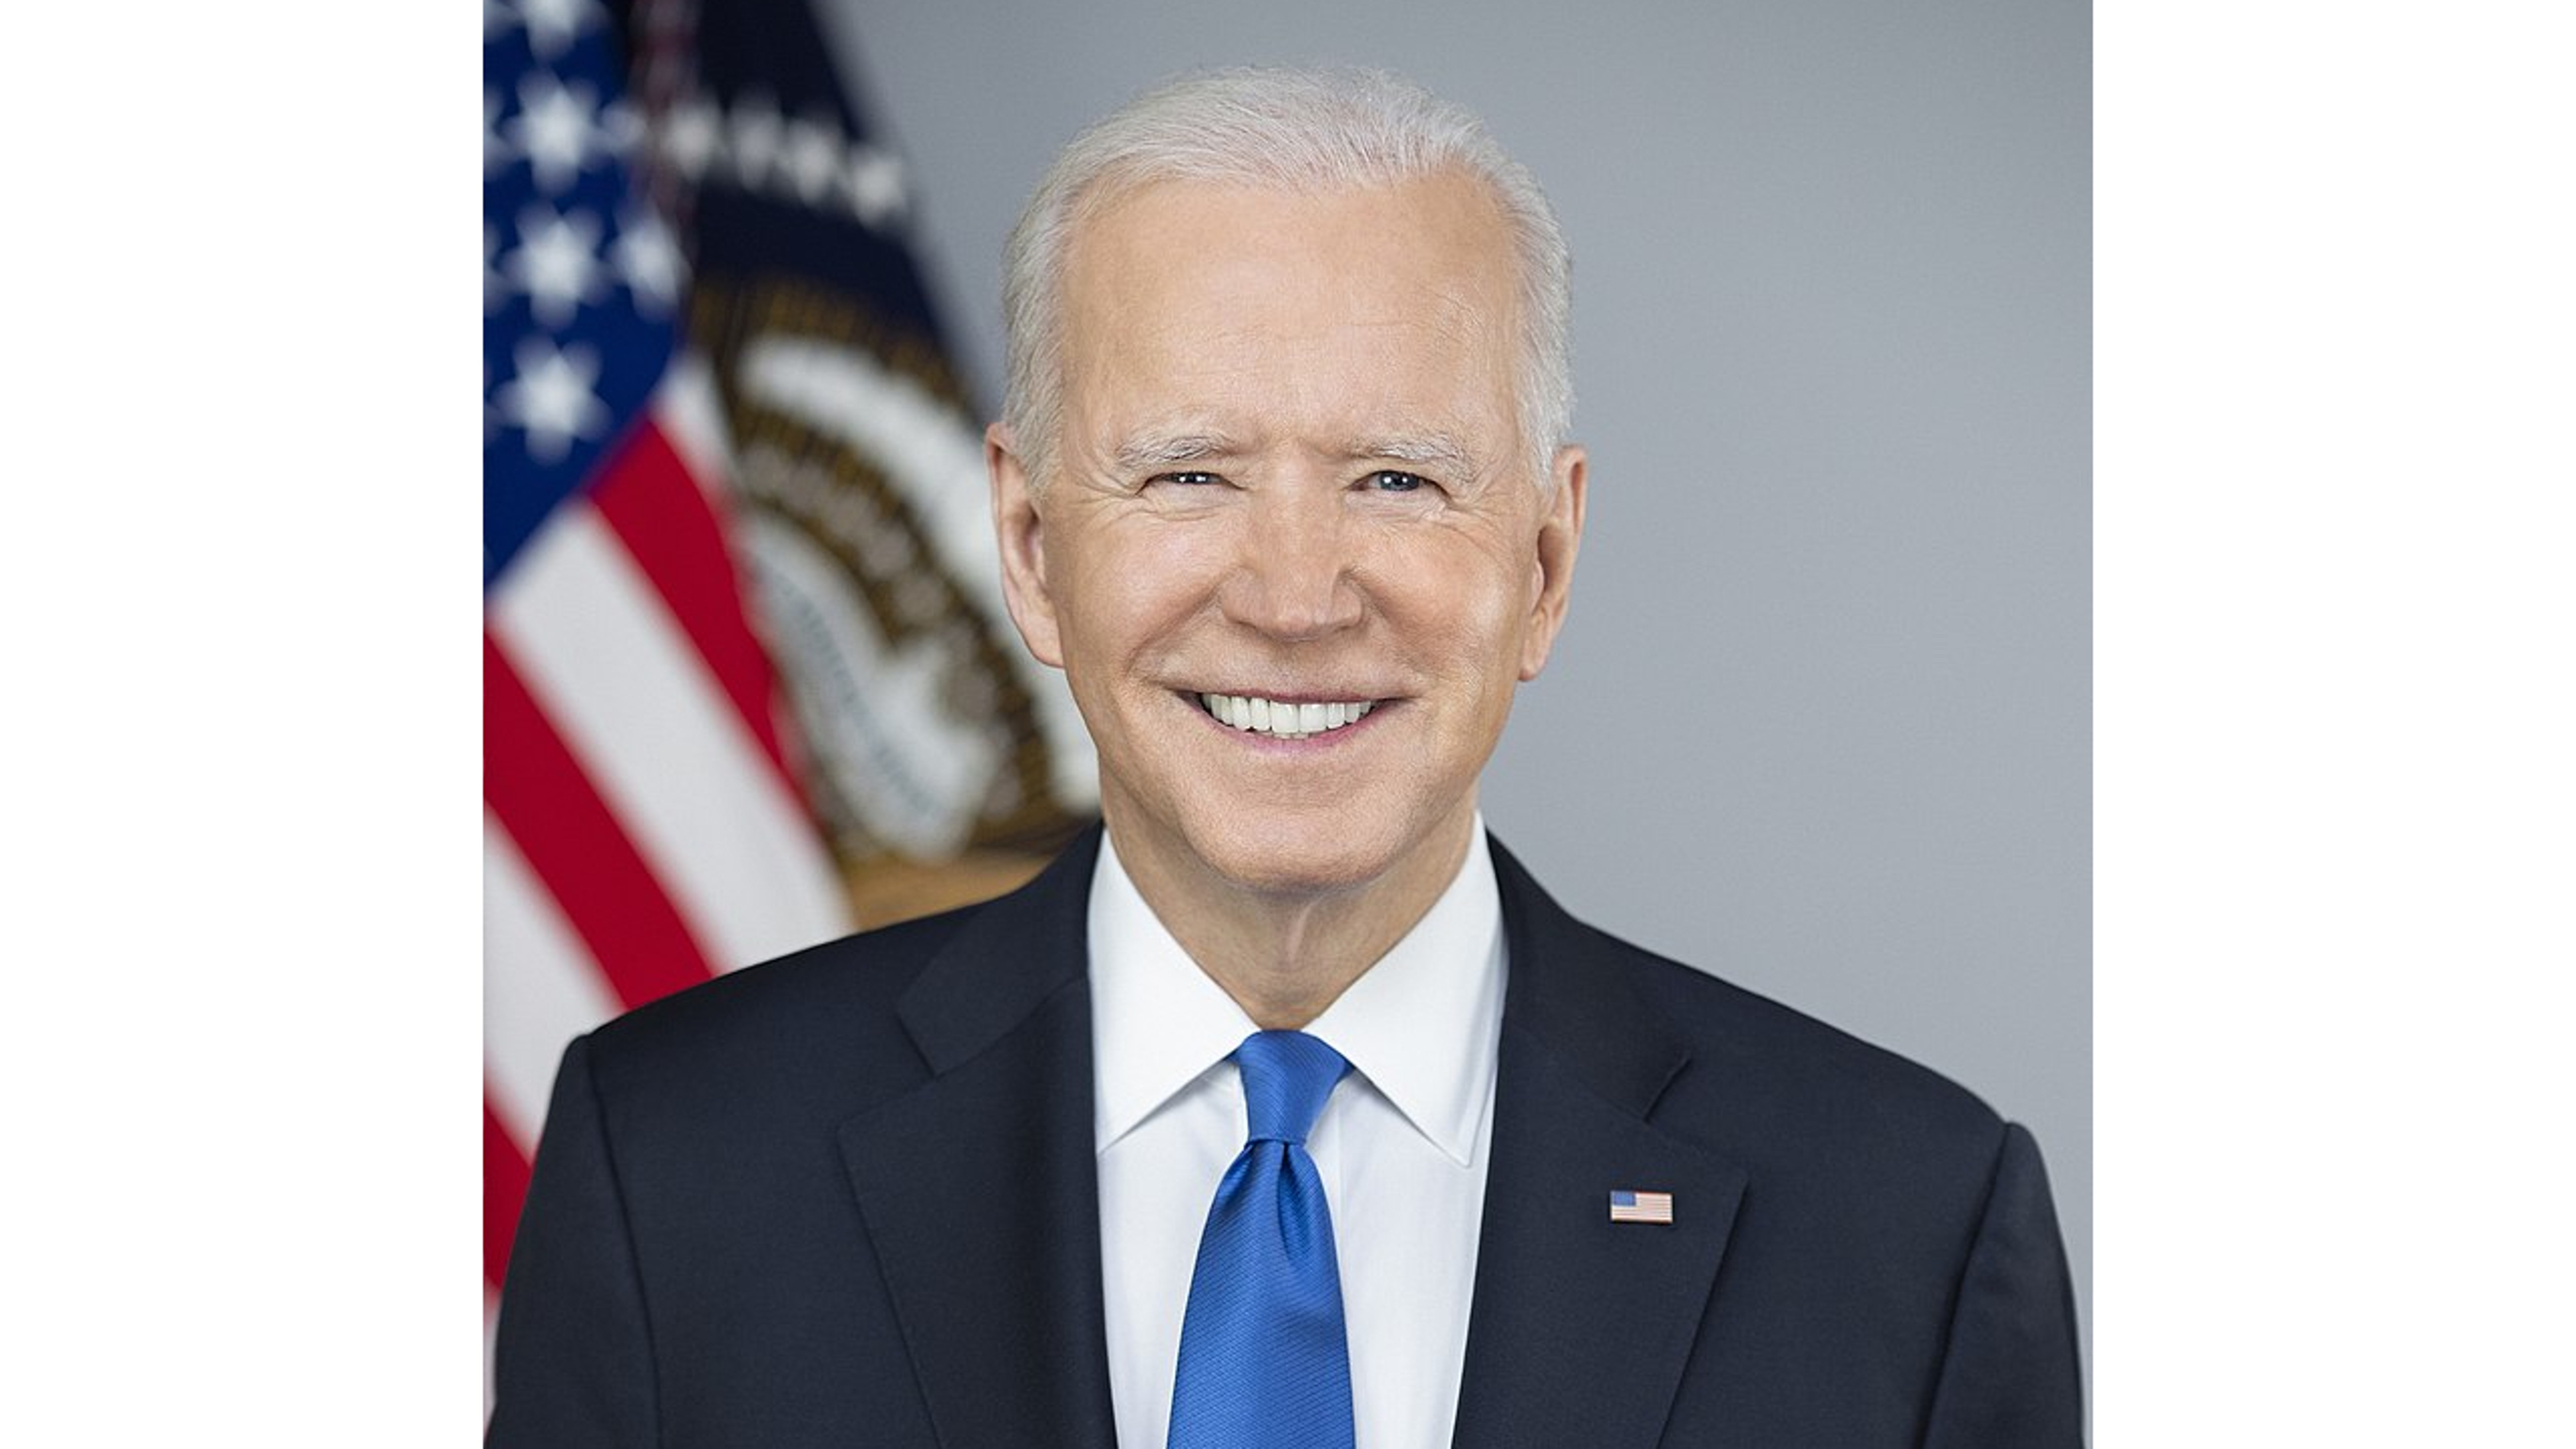 Biden Administration Advises Applicants Not To Invest In Cannabis Companies. Is Federal Legalization Behind This?